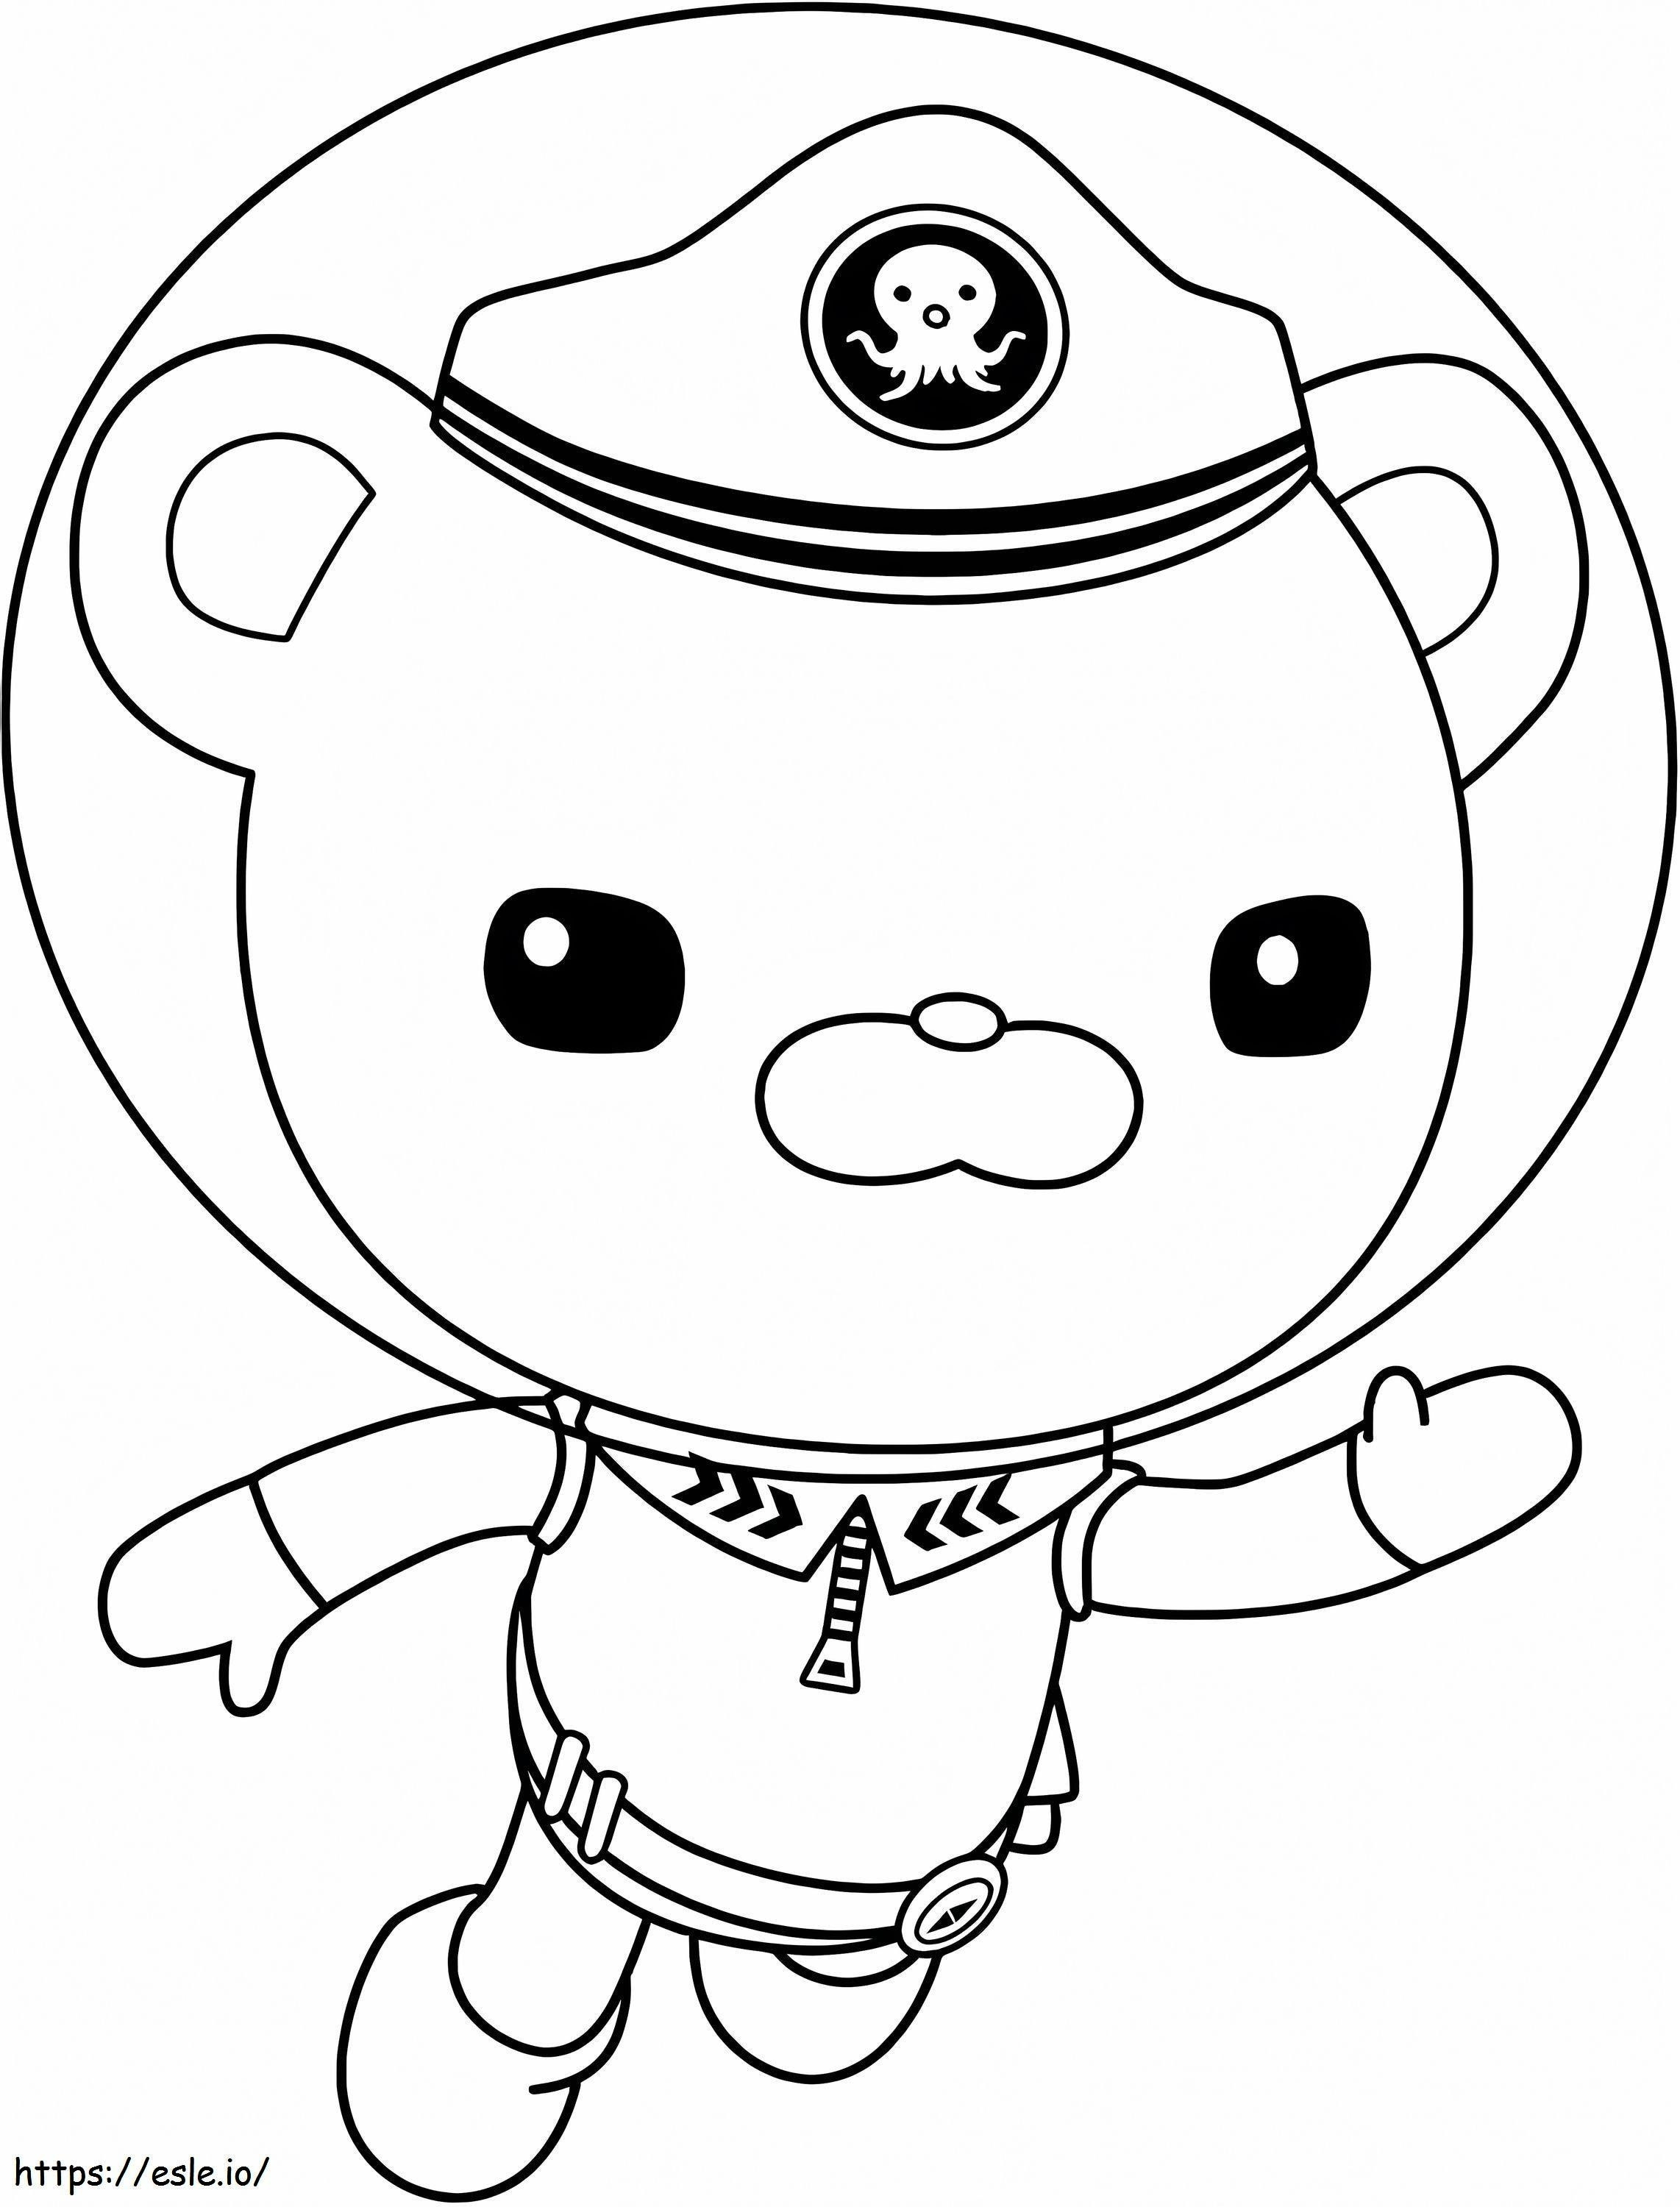 Captain Barnacles coloring page